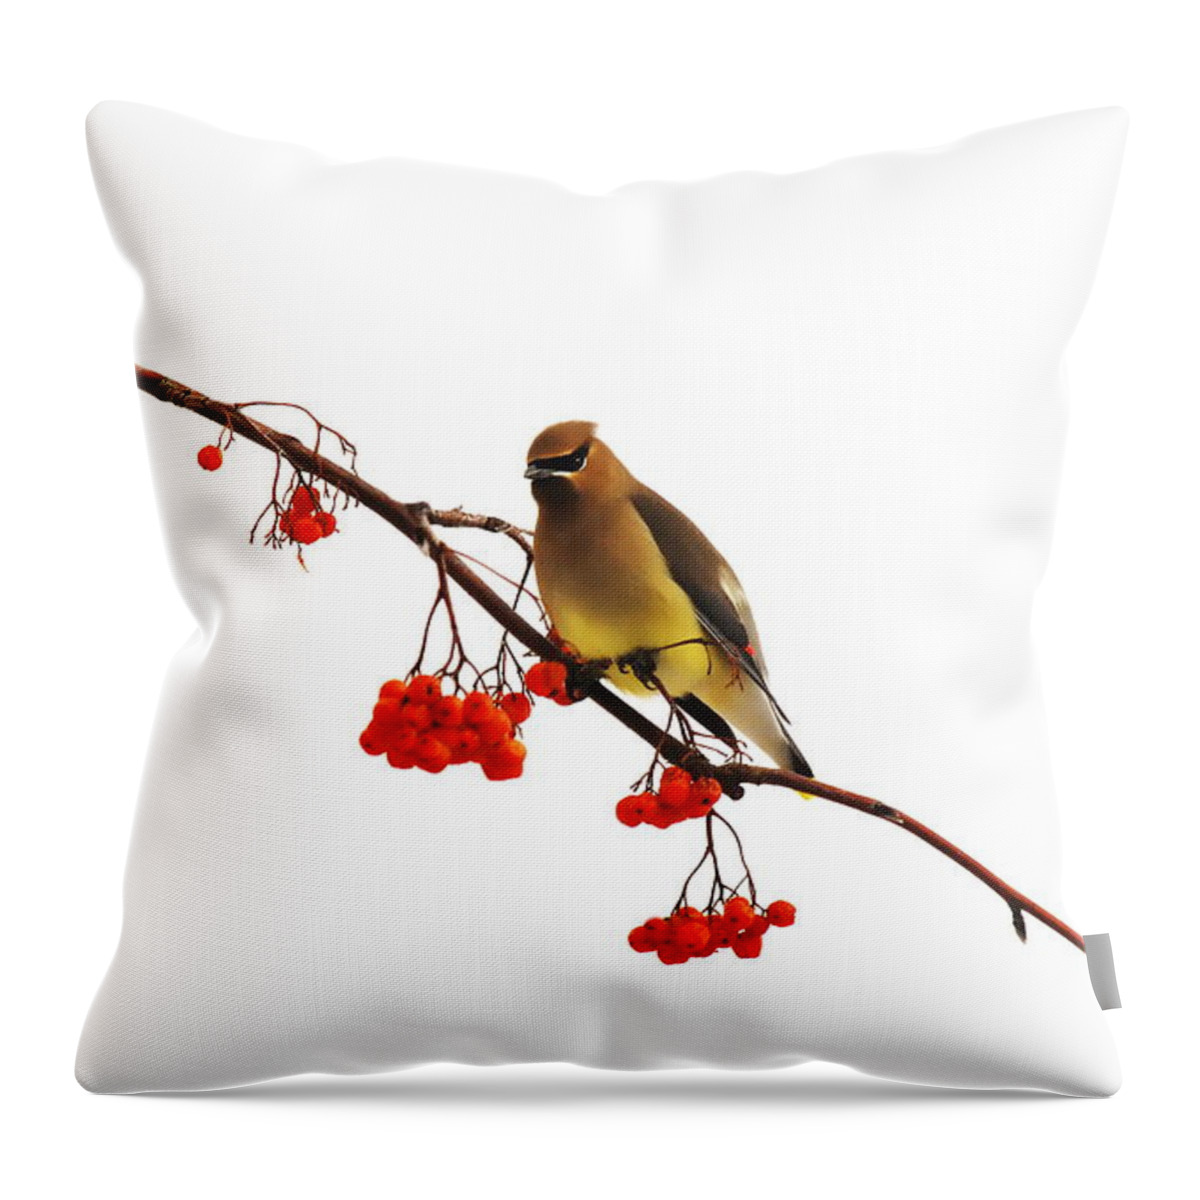 Waxwing Throw Pillow featuring the photograph Winter Birds - Waxwing by Andrea Kollo